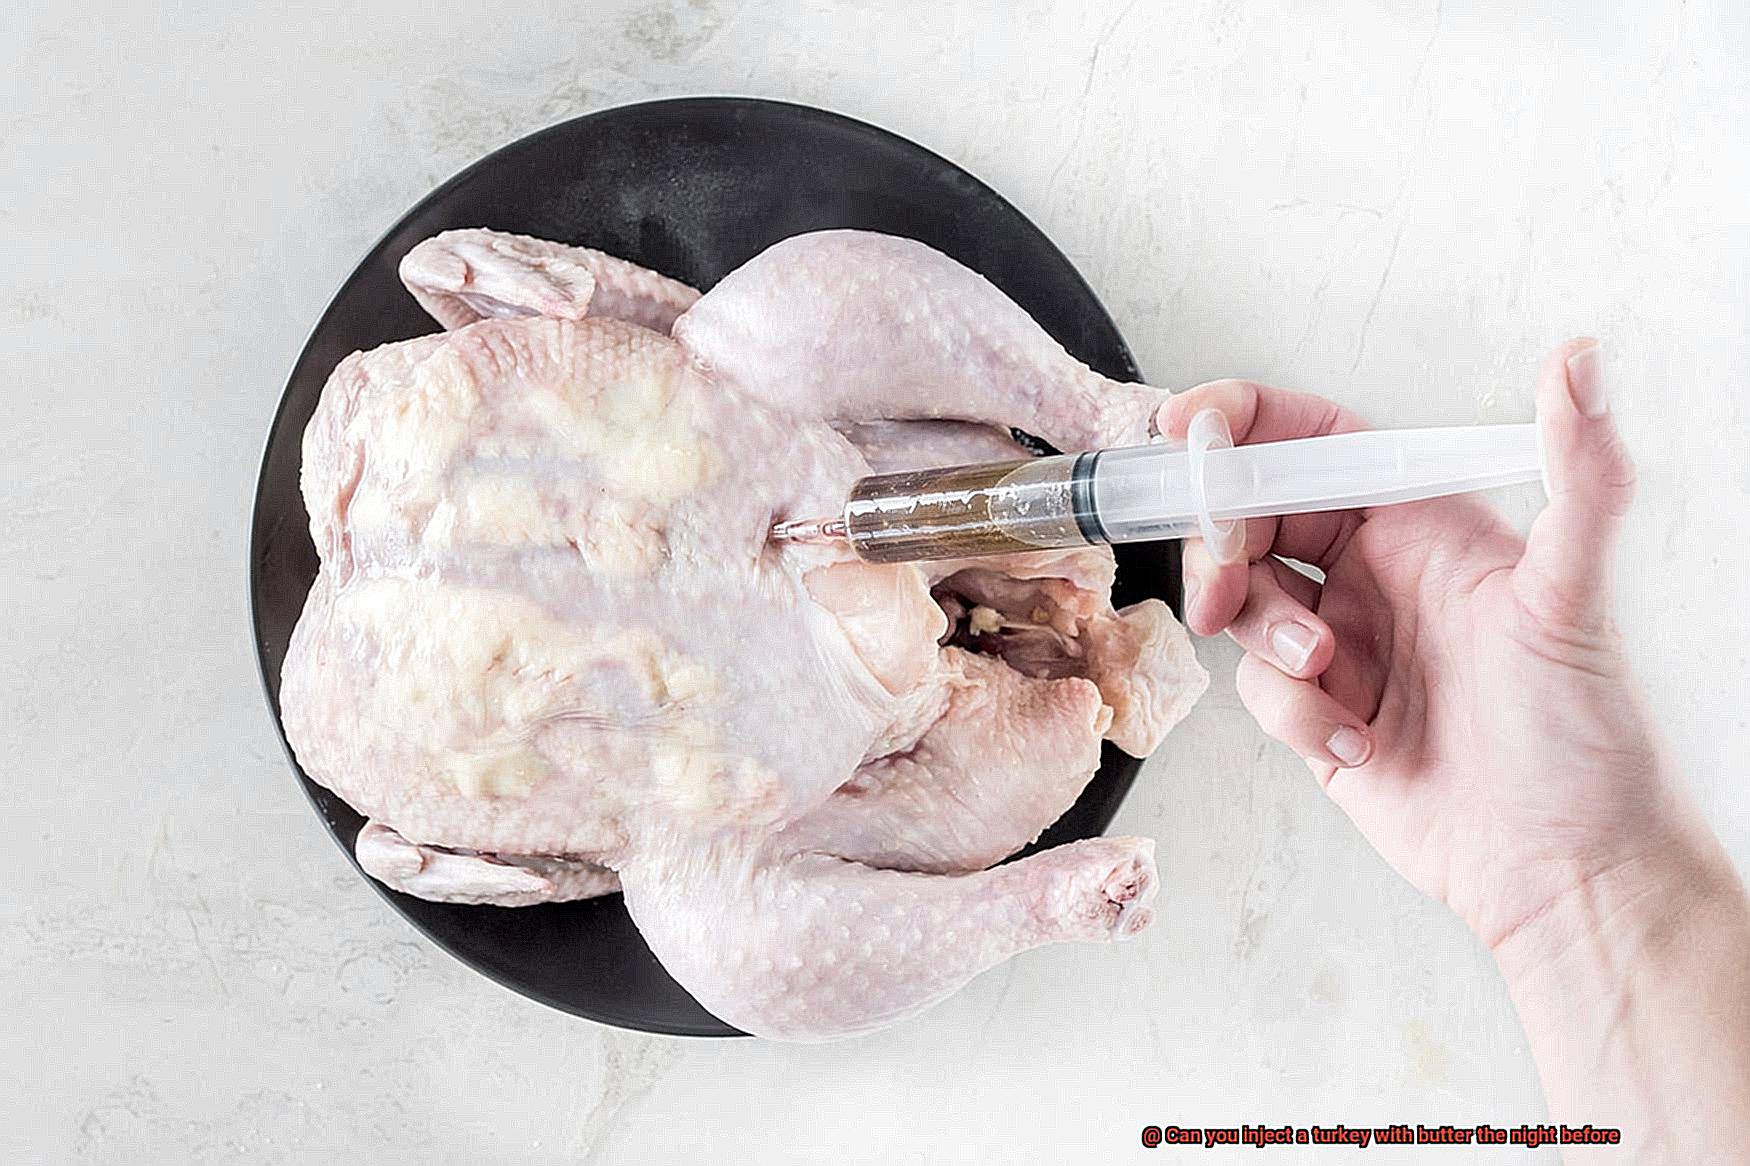 Can you inject a turkey with butter the night before-10